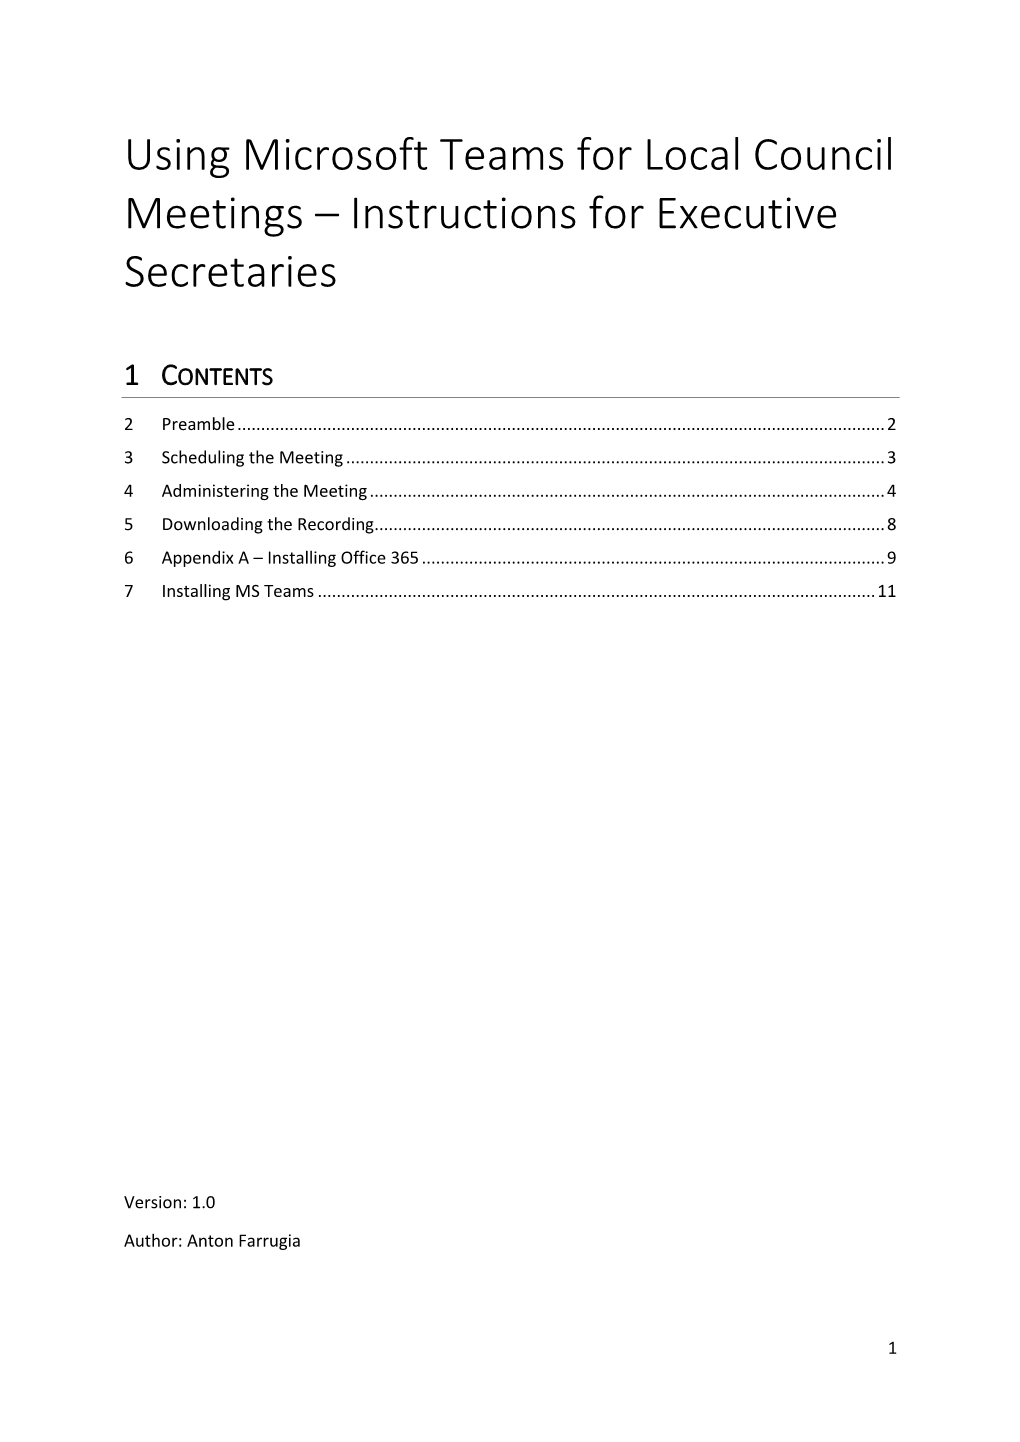 Using Microsoft Teams for Local Council Meetings – Instructions for Executive Secretaries